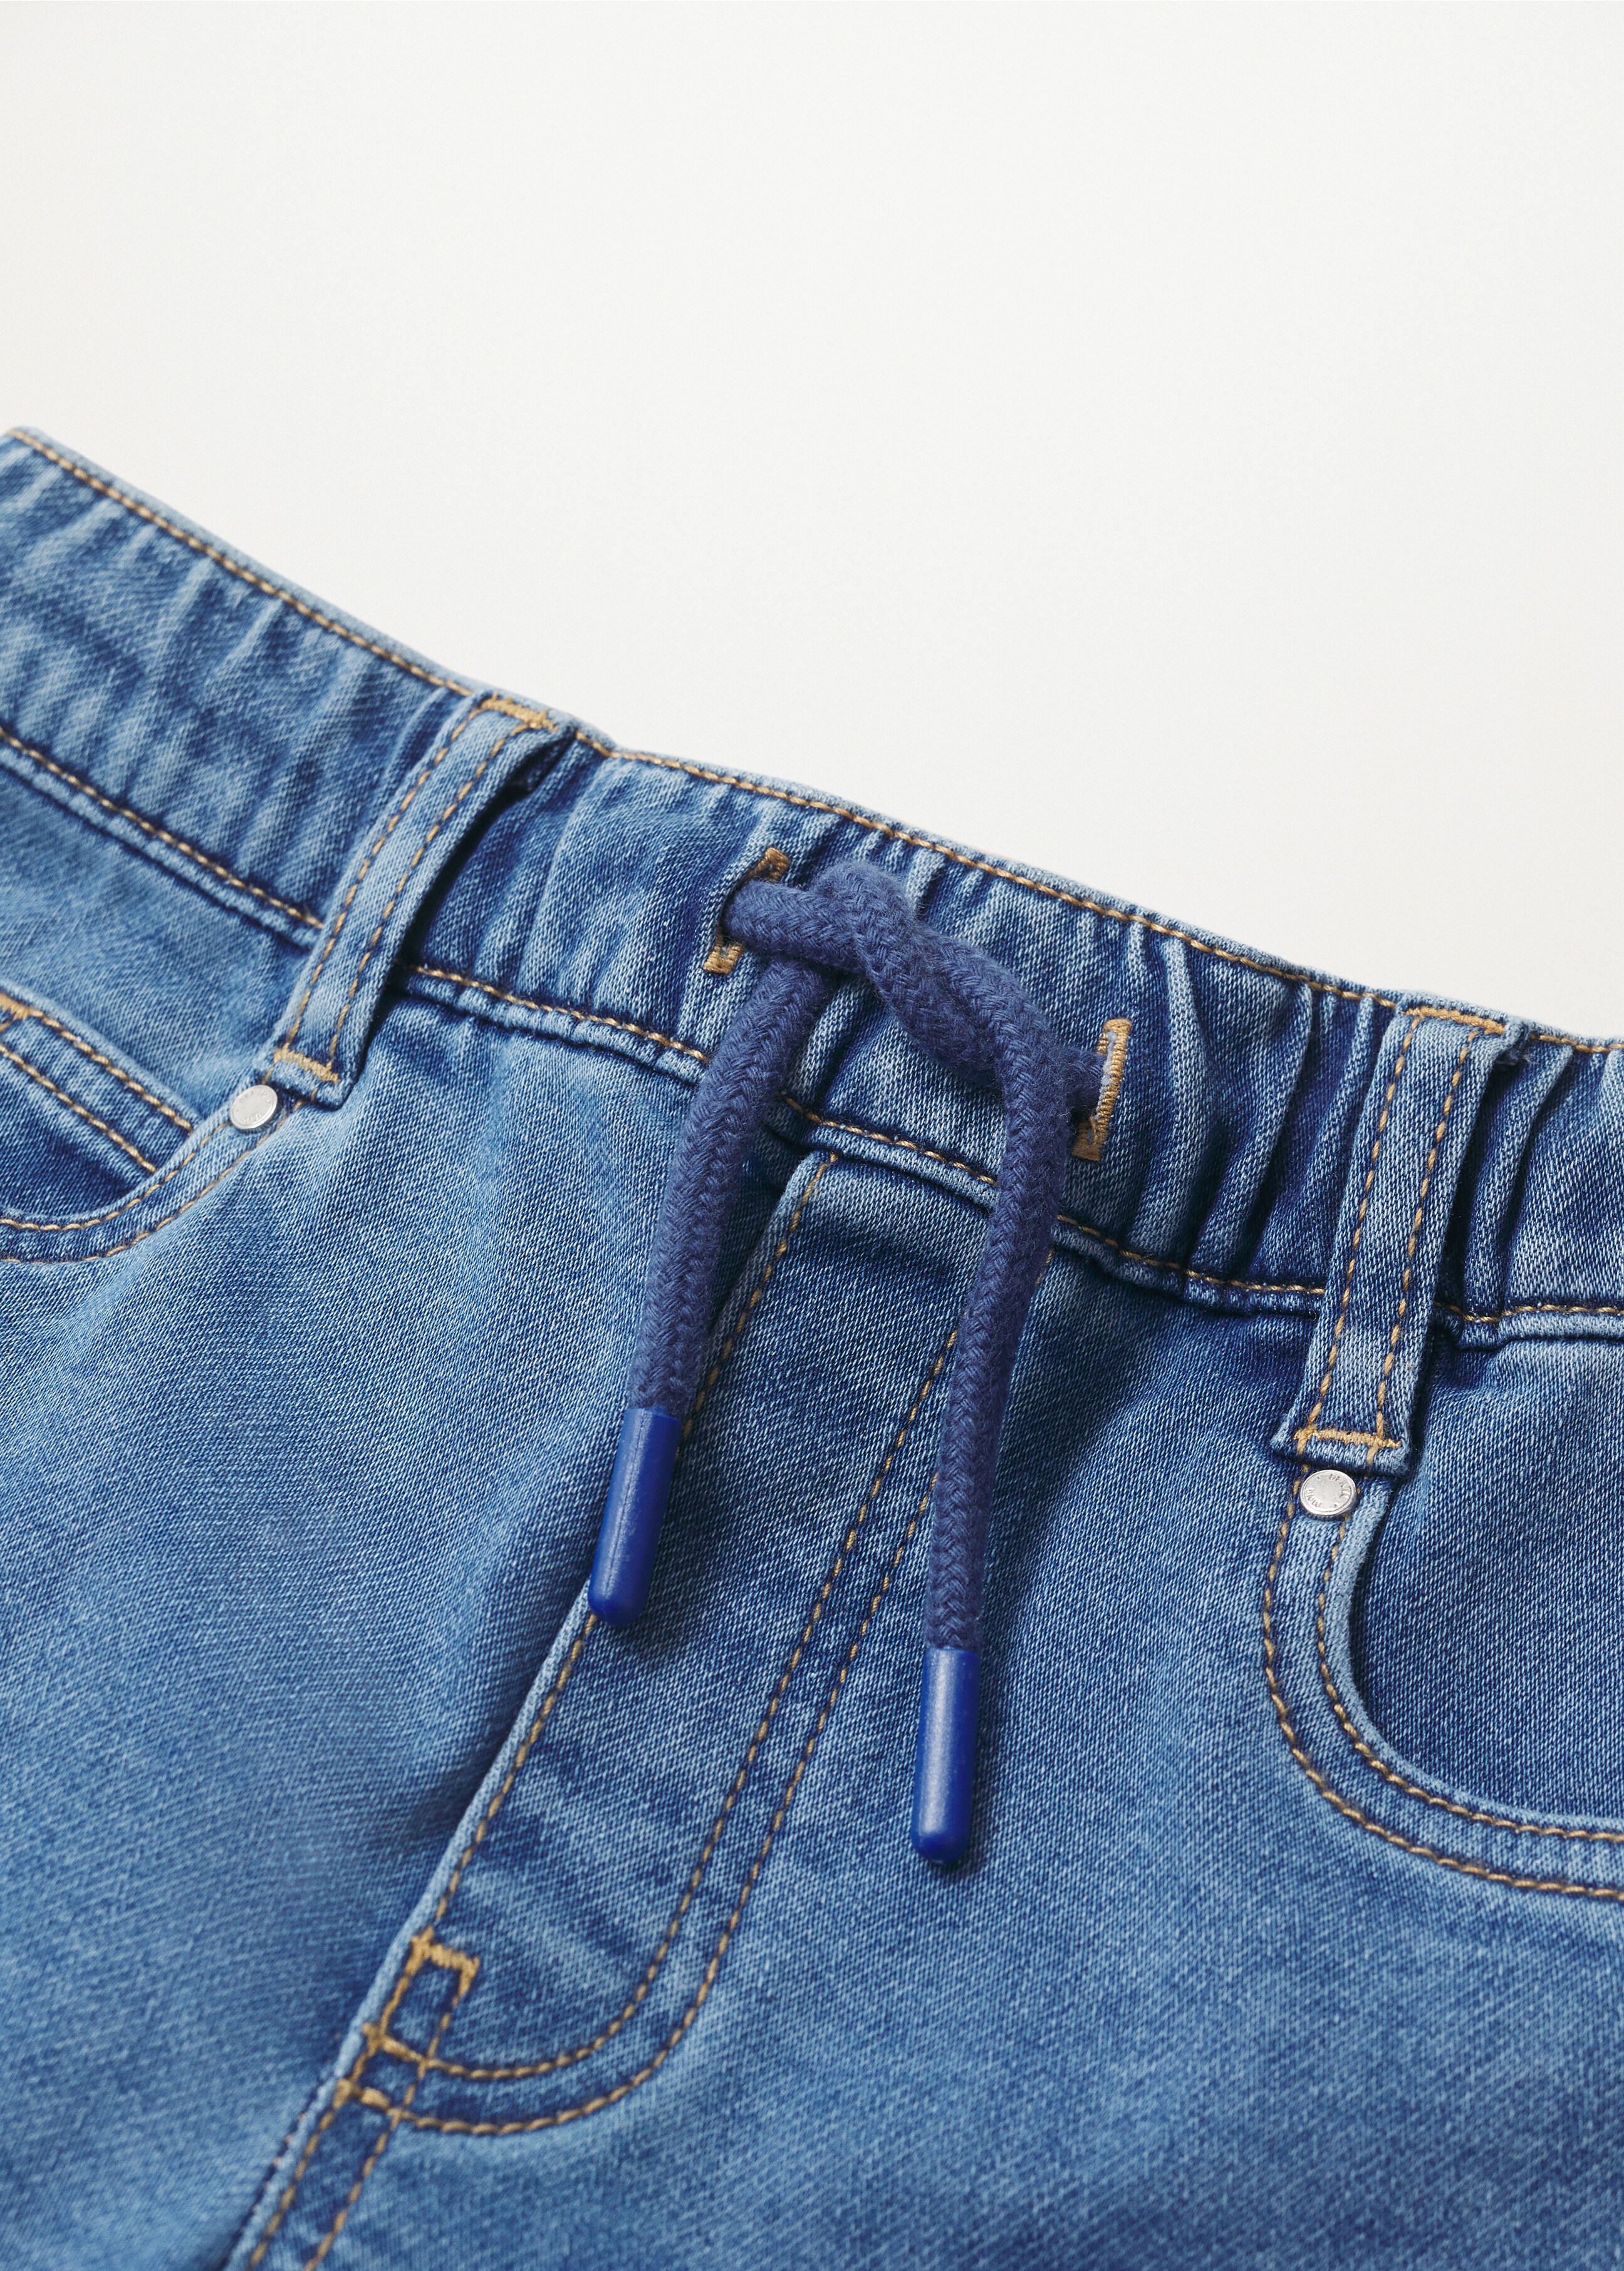 Lace drawstring waist jeans - Details of the article 8